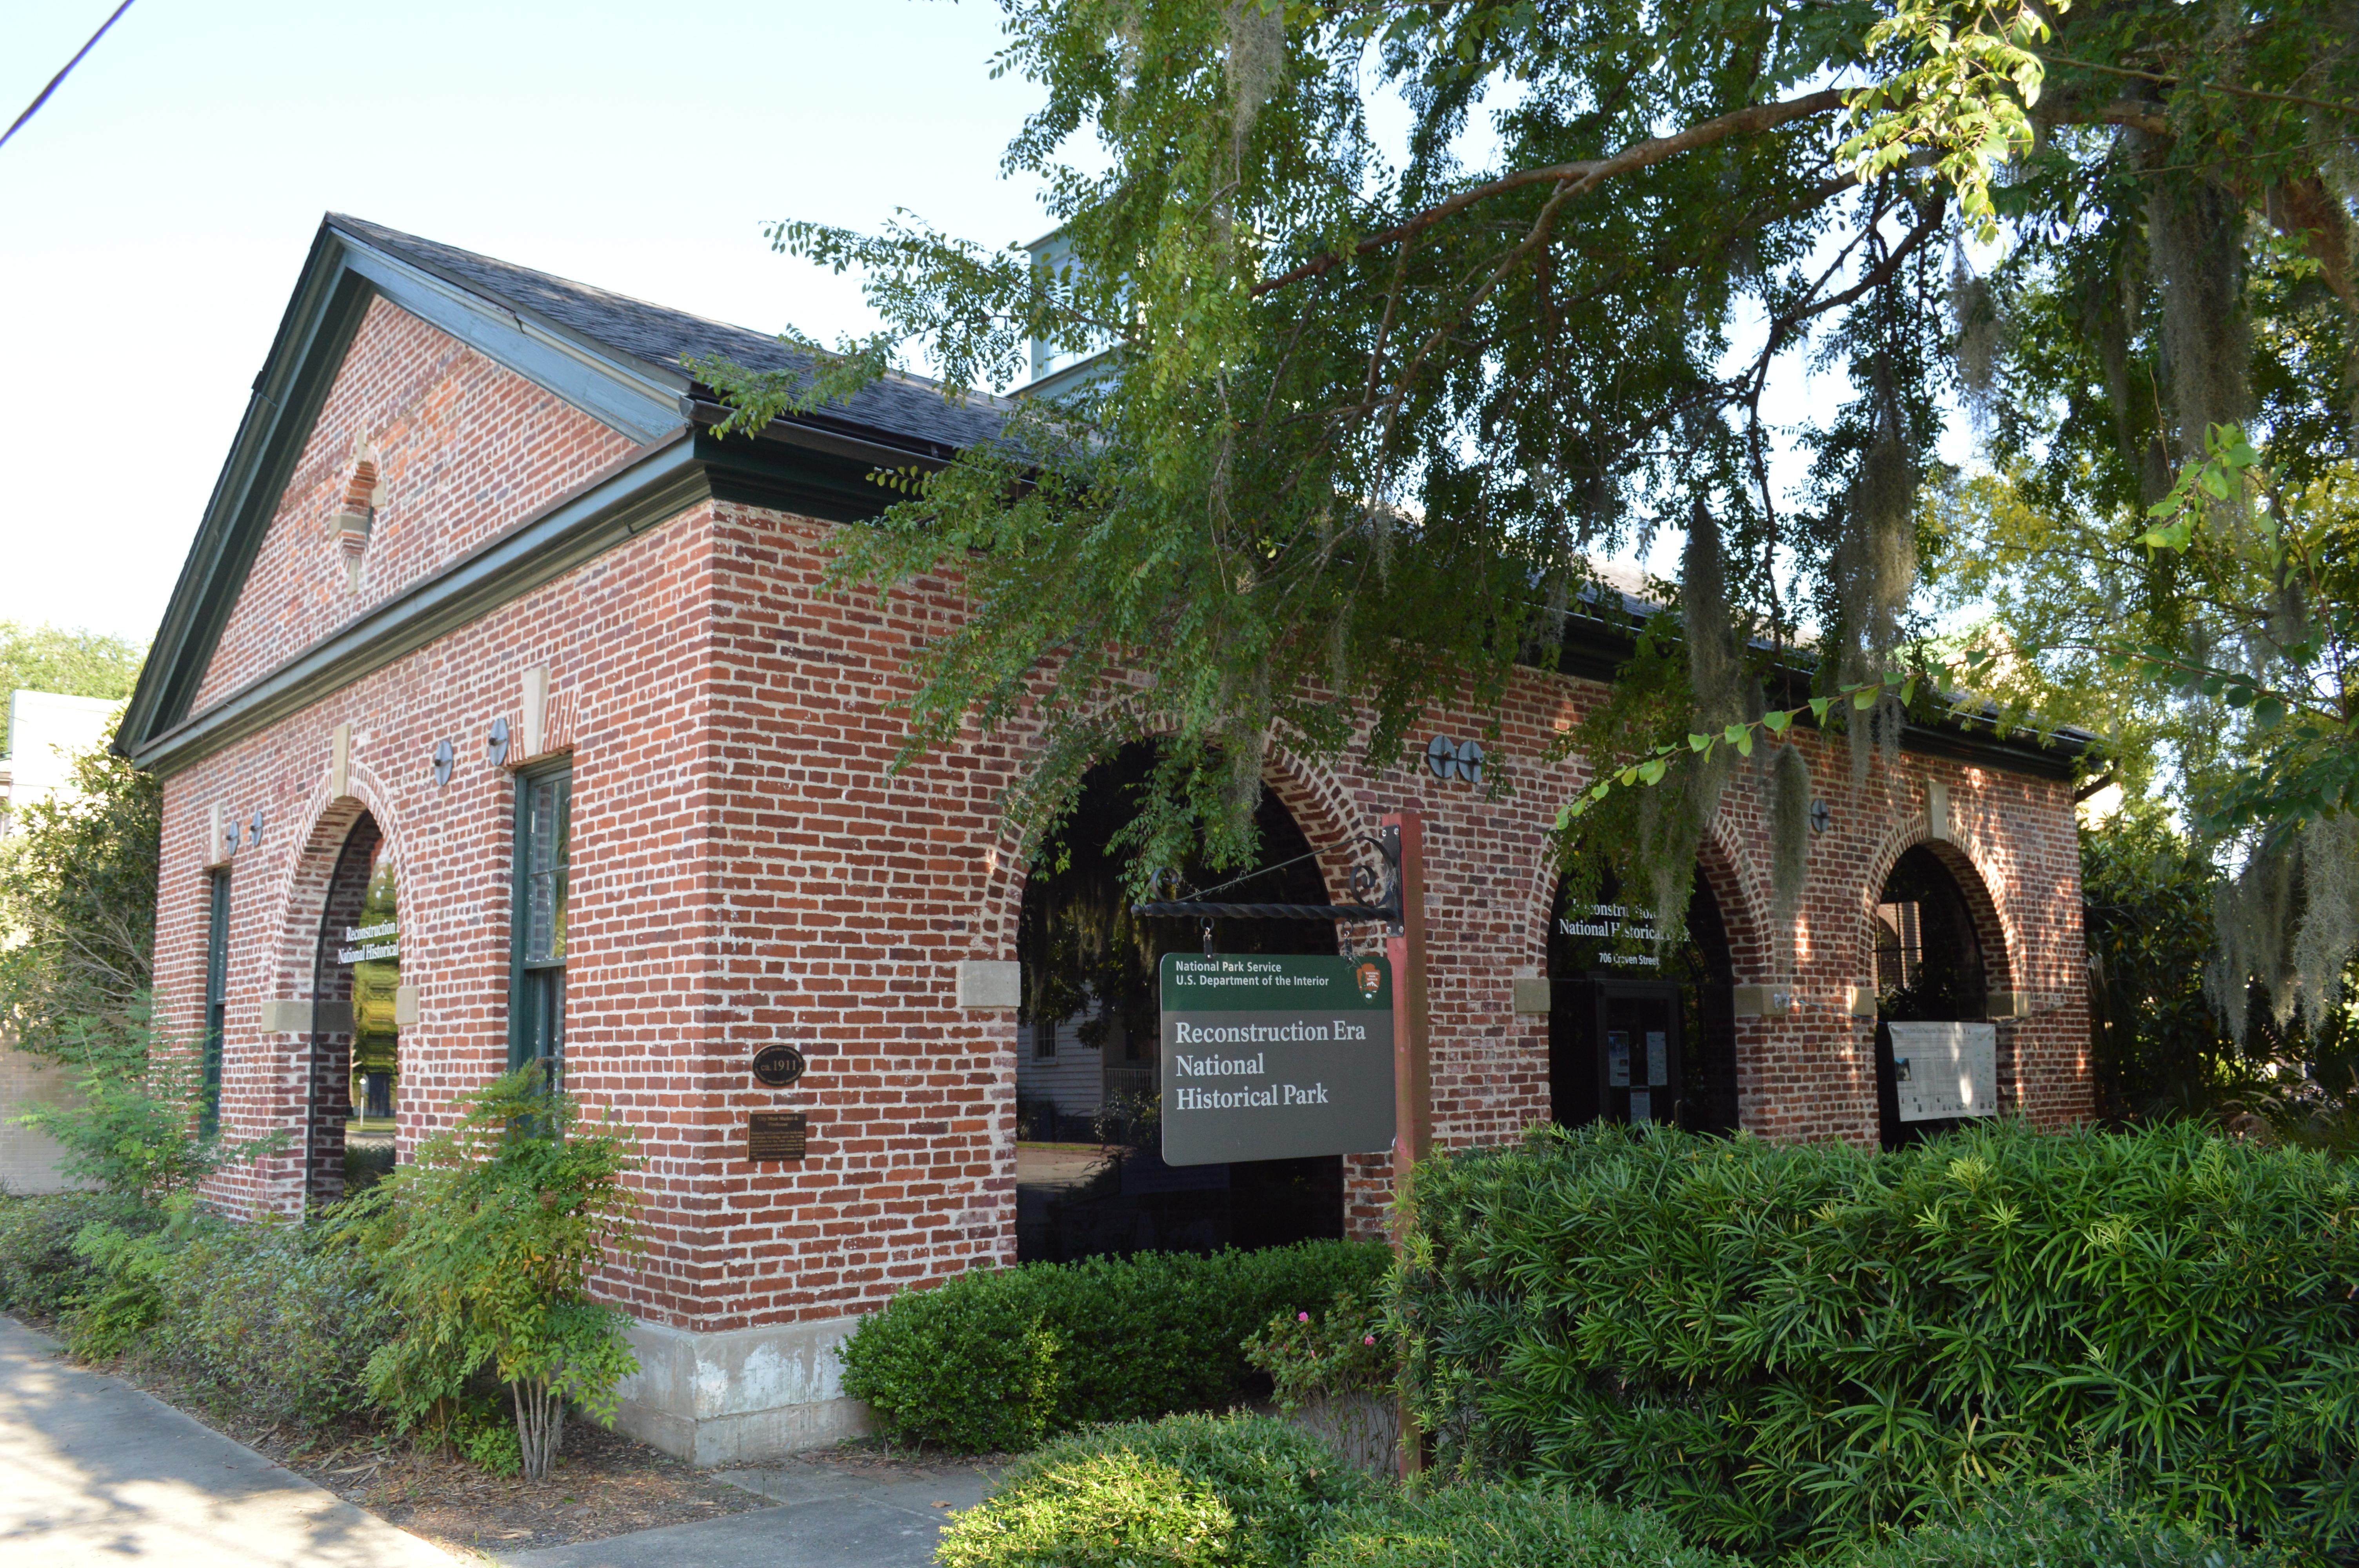 The Old Beaufort Fire House